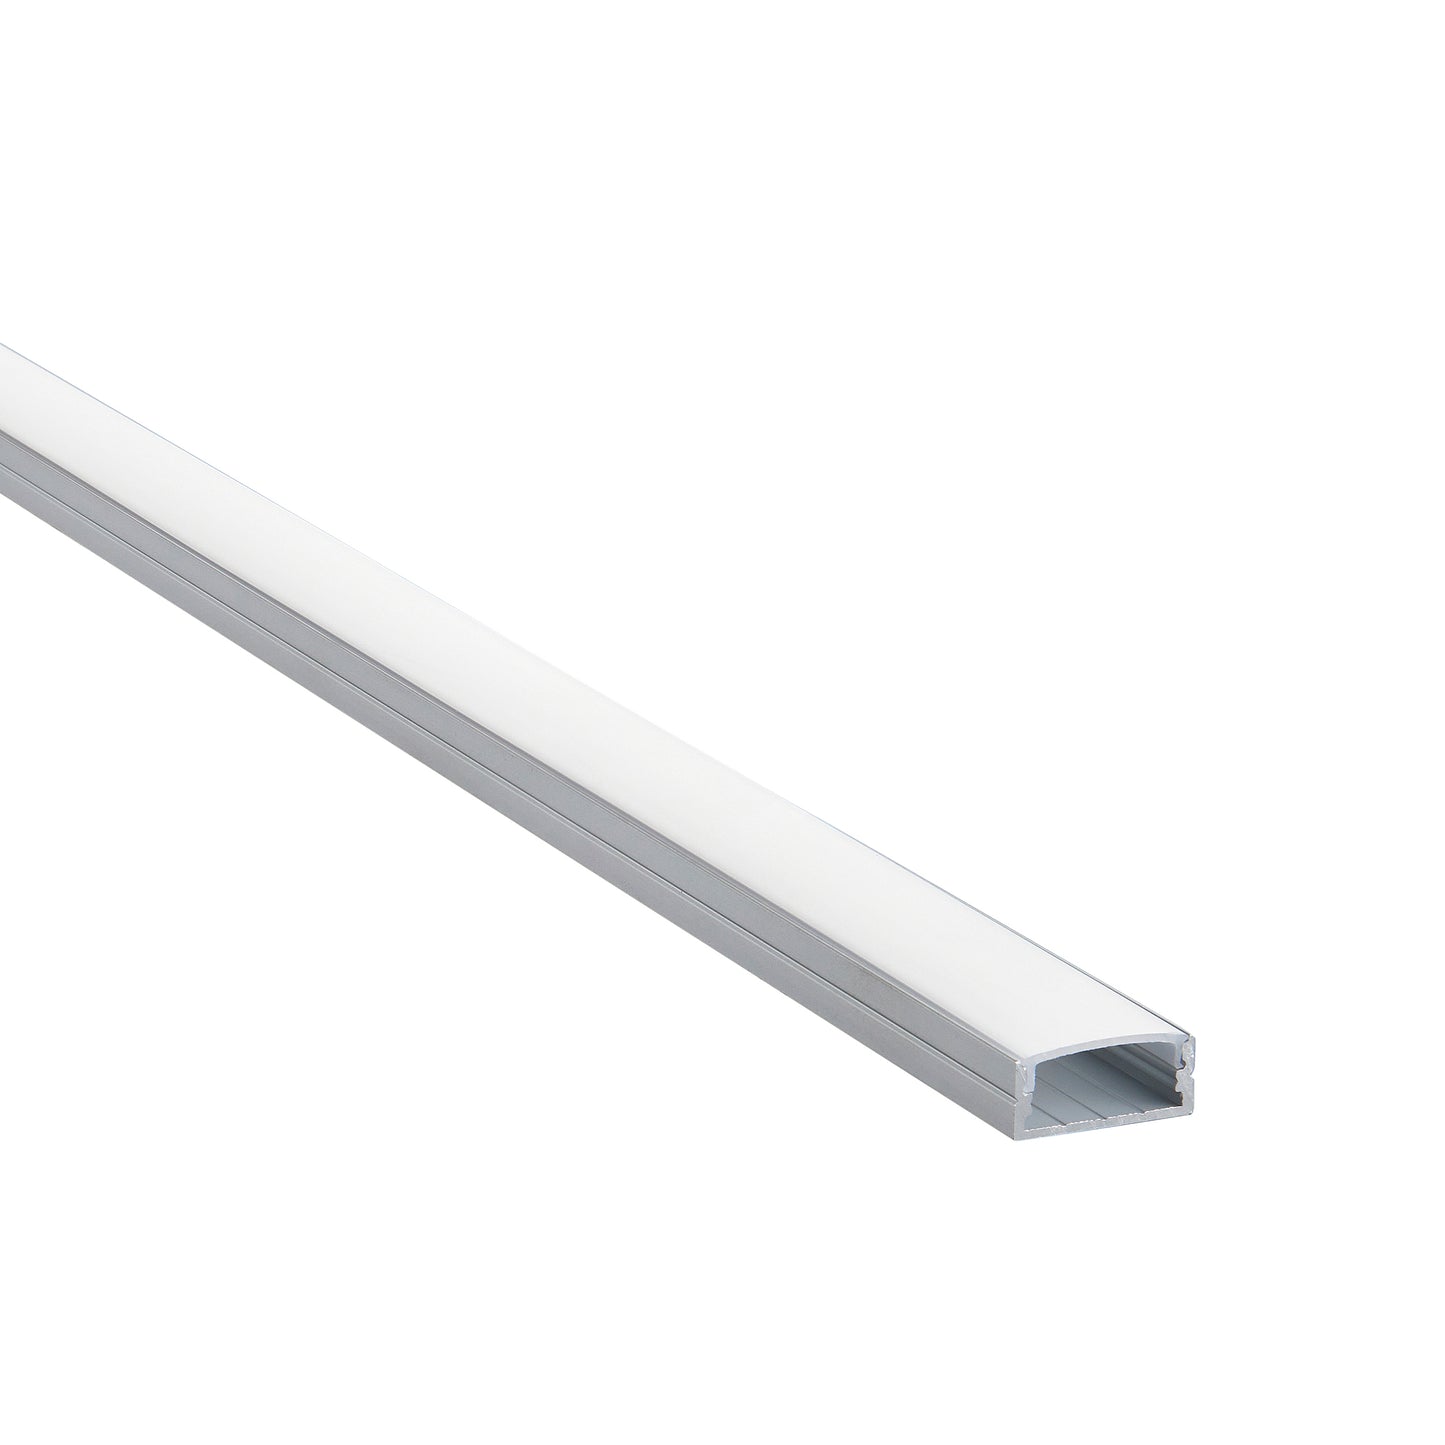 Saxby RigelSLIM Surface Wide 2m Aluminium Profile/Extrusion Silver